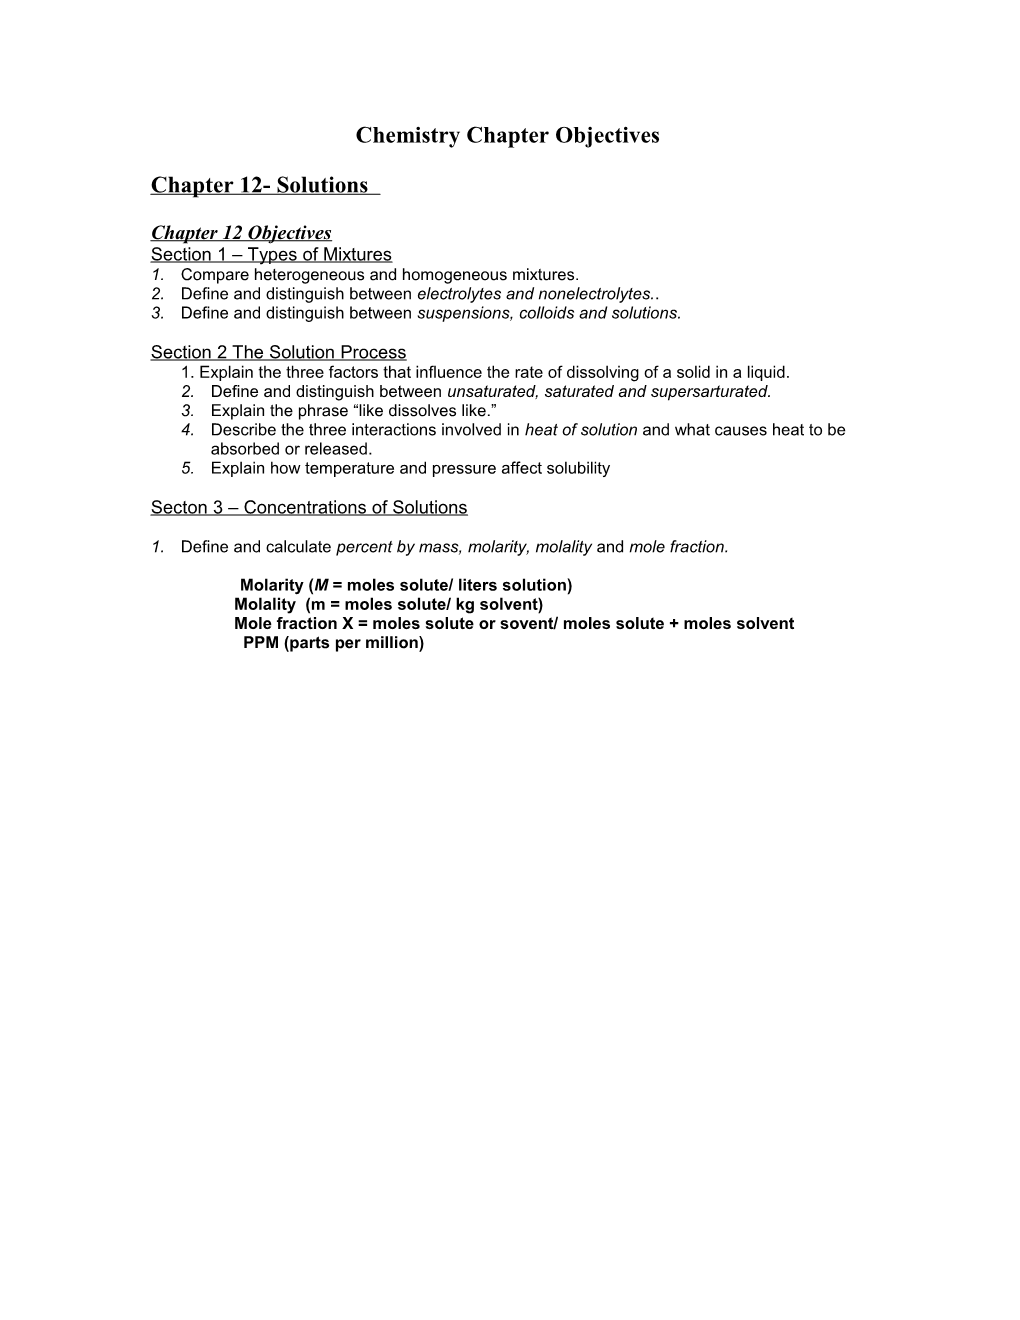 Chemistry Chapter Objectives & Assignment Sheet